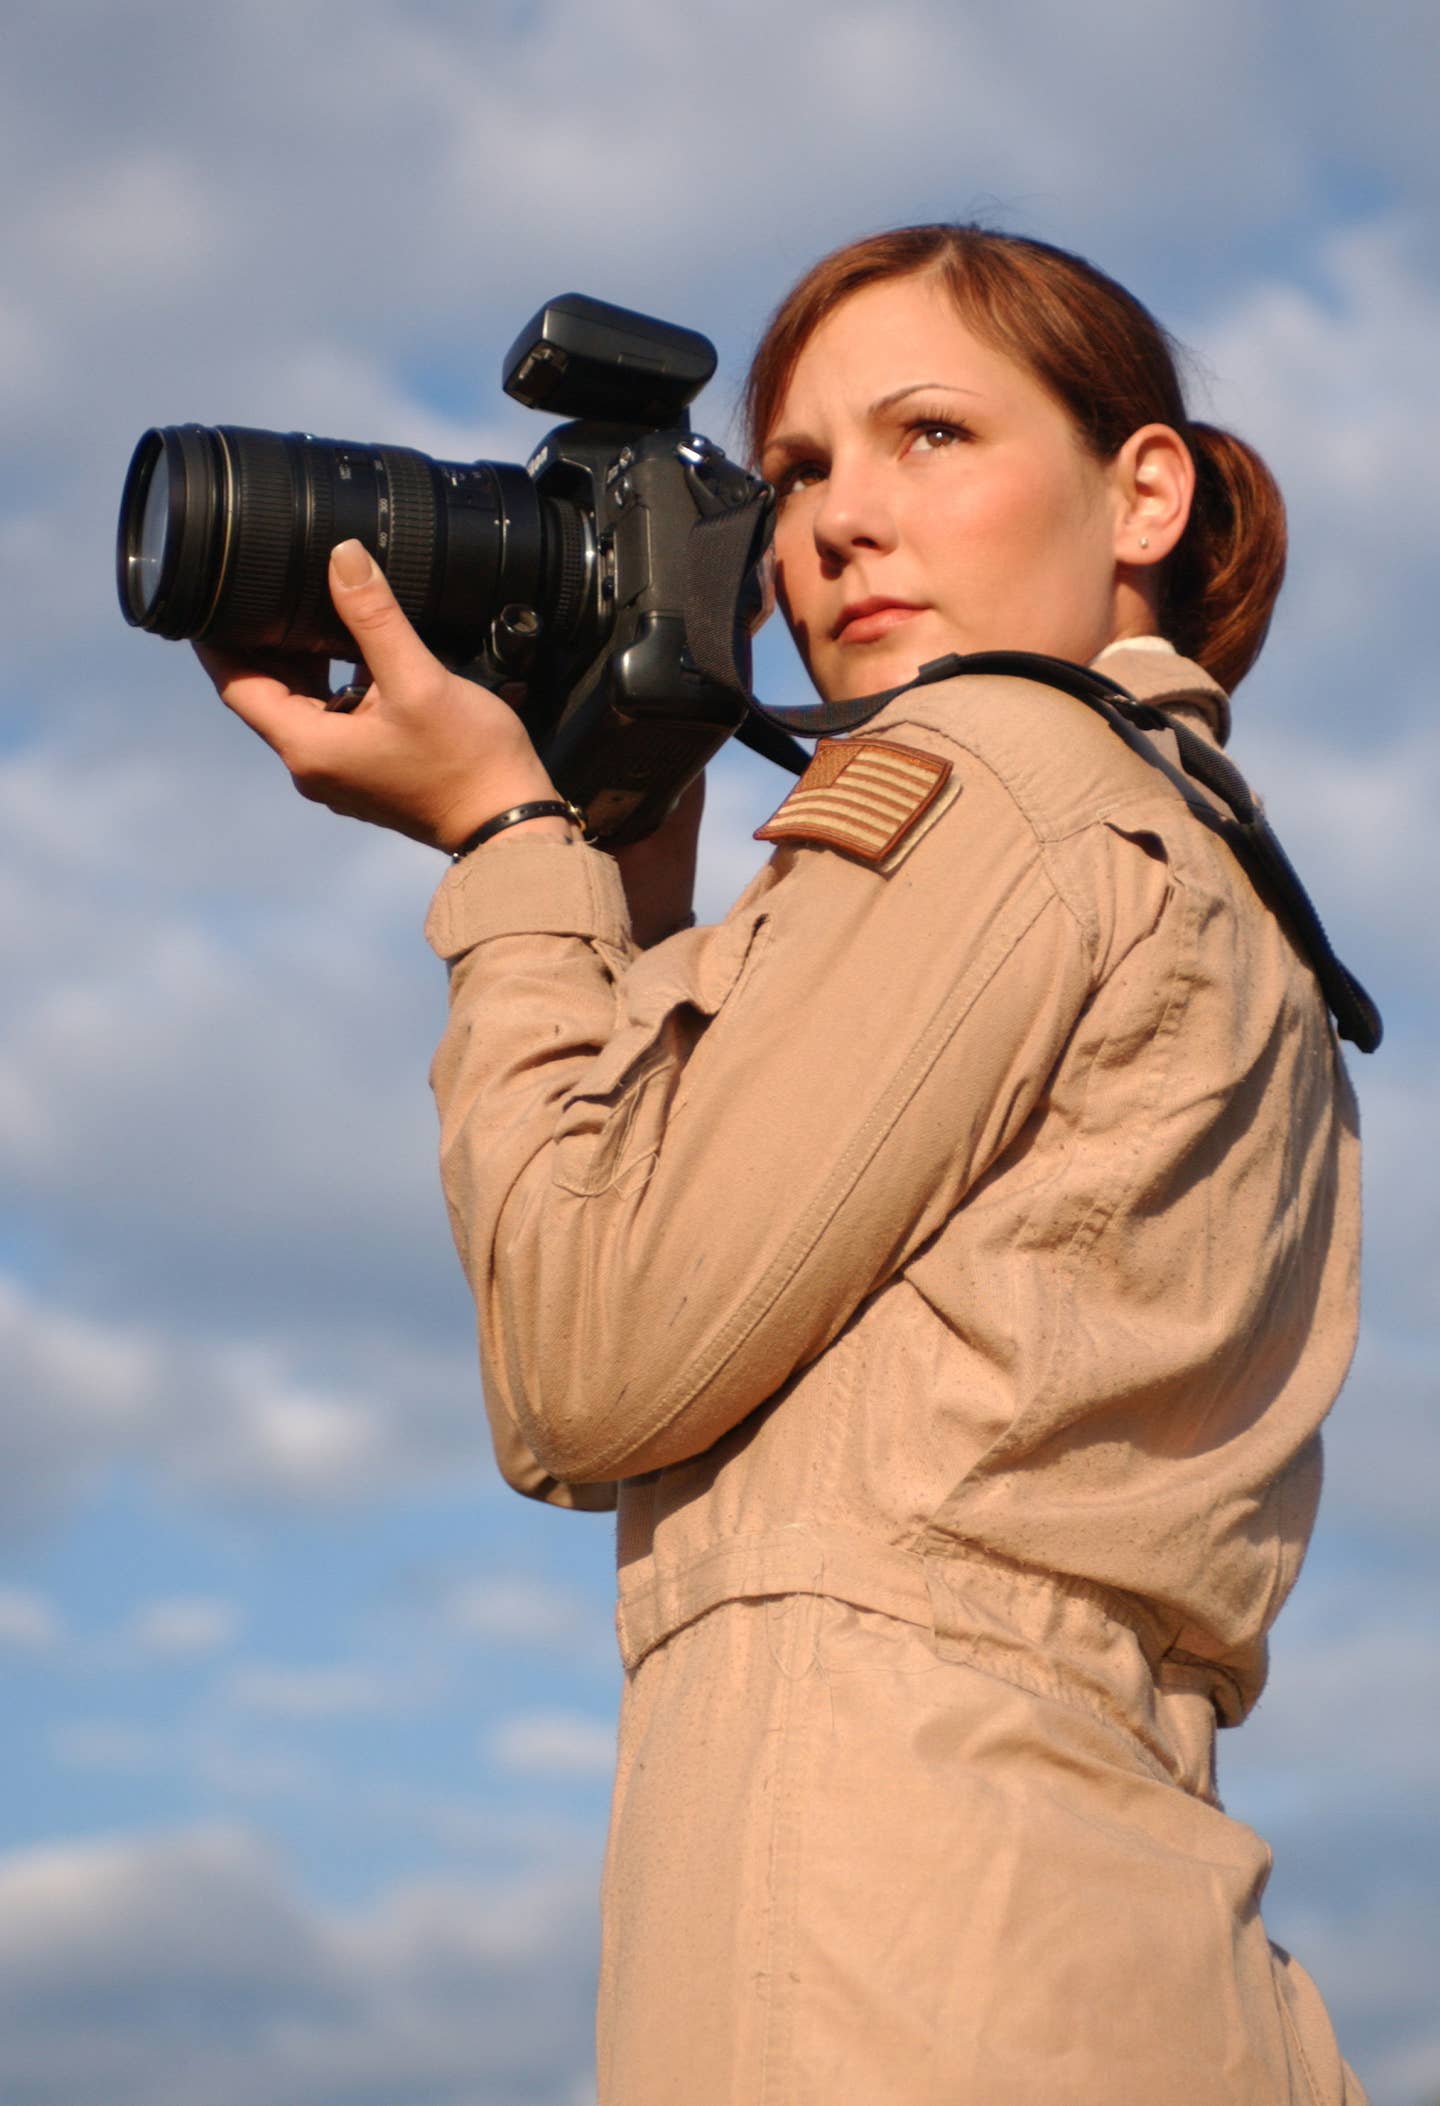 Stacy Pearsall with a camera.